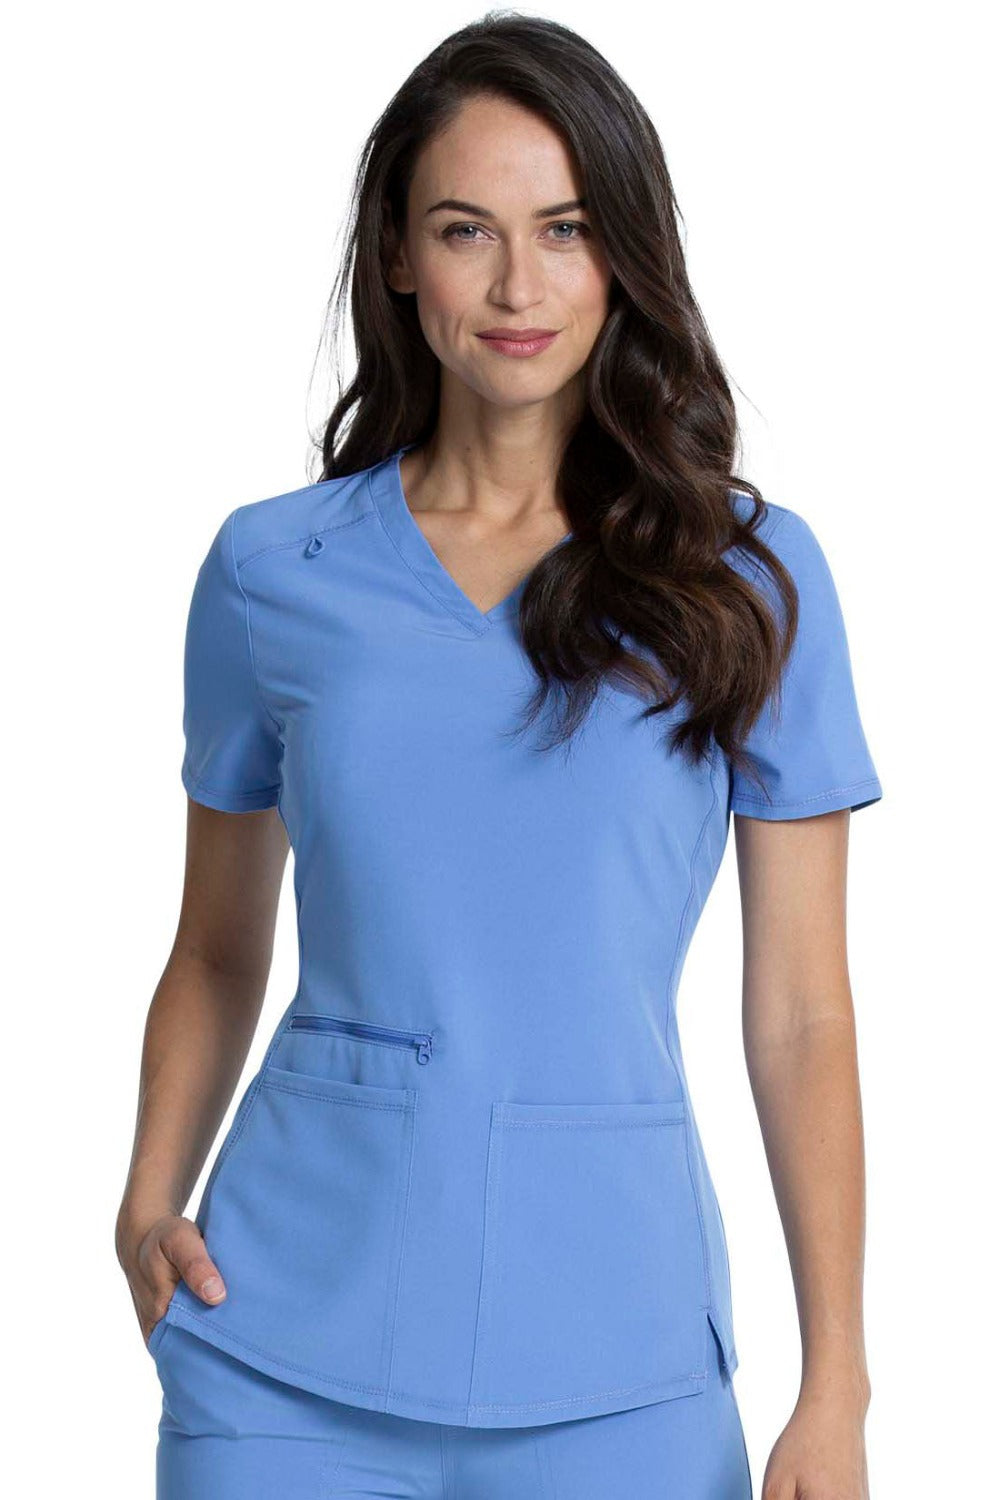 Cherokee Allura V-Neck Scrub Top in Ciel at Parker's Clothing and Shoes.